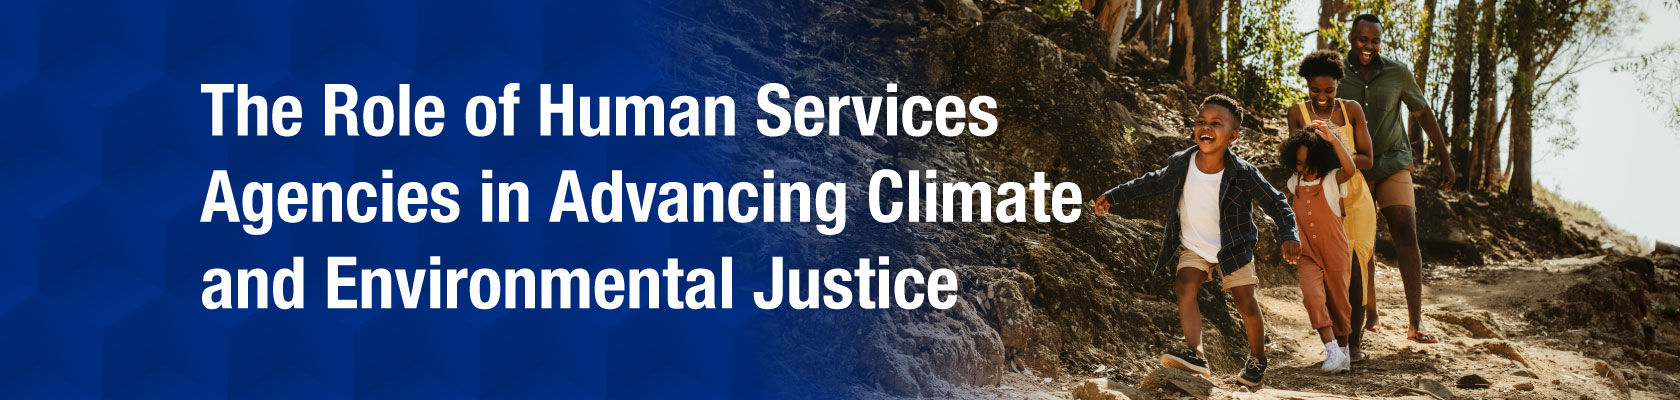 The Role of Human Services Agencies in Advancing Climate and Environmental Justice